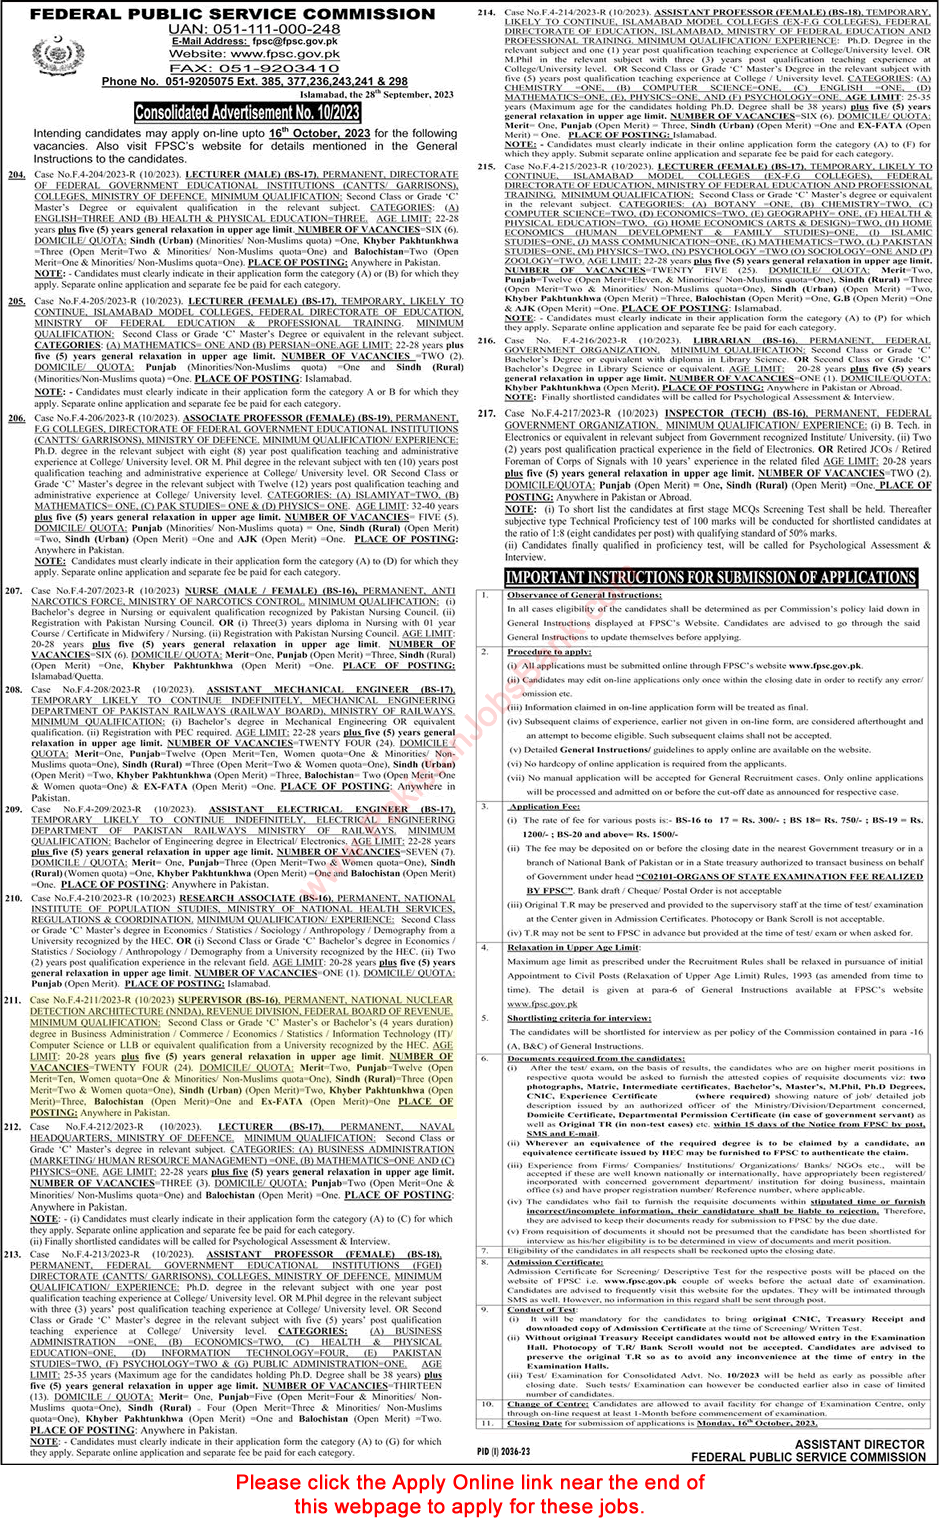 Supervisor Jobs in Federal Board of Revenue October 2023 FPSC Apply Online FBR National Nuclear Detection Architecture Latest